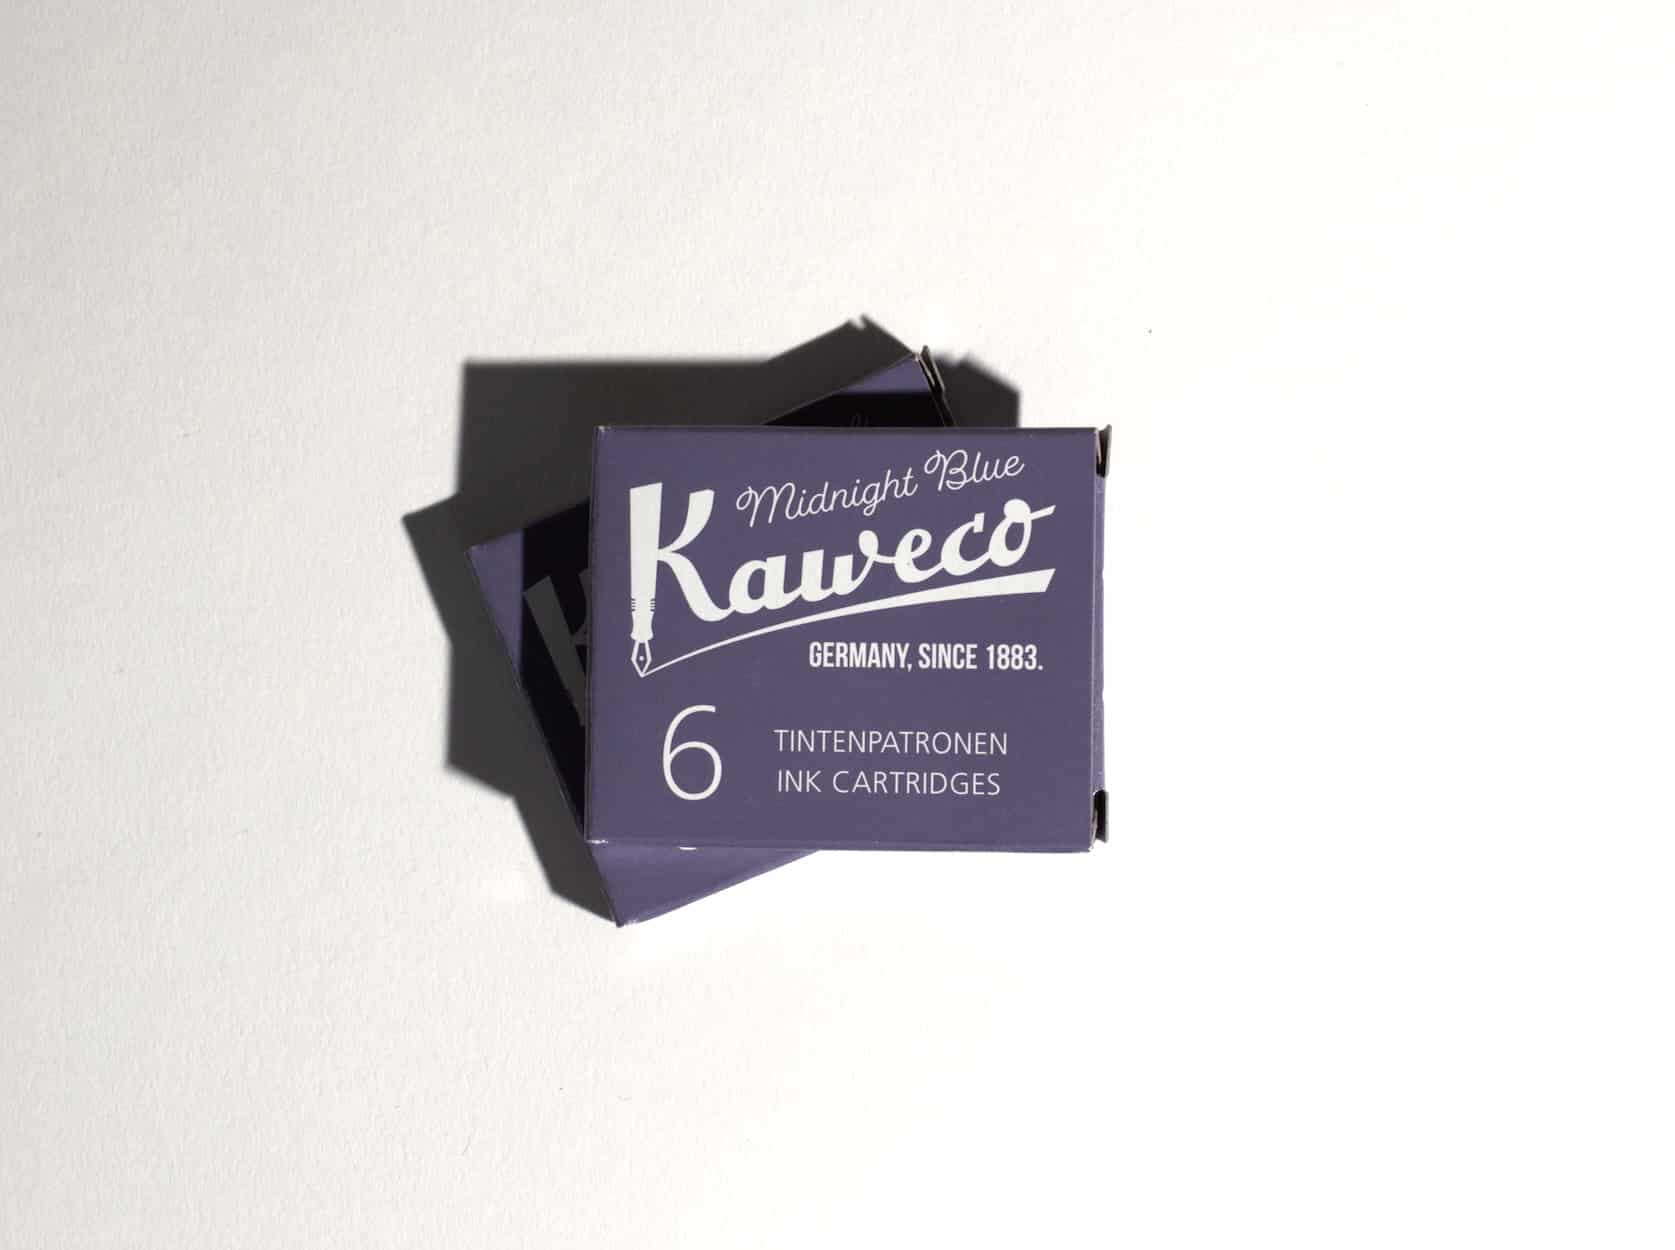 Two boxes of ink cartridges lie on a white surface. Text on packaging reads: Kaweco. Midnight Blue. Germany, since 1883. 6 Tintenpatronen. Ink Cartridges.